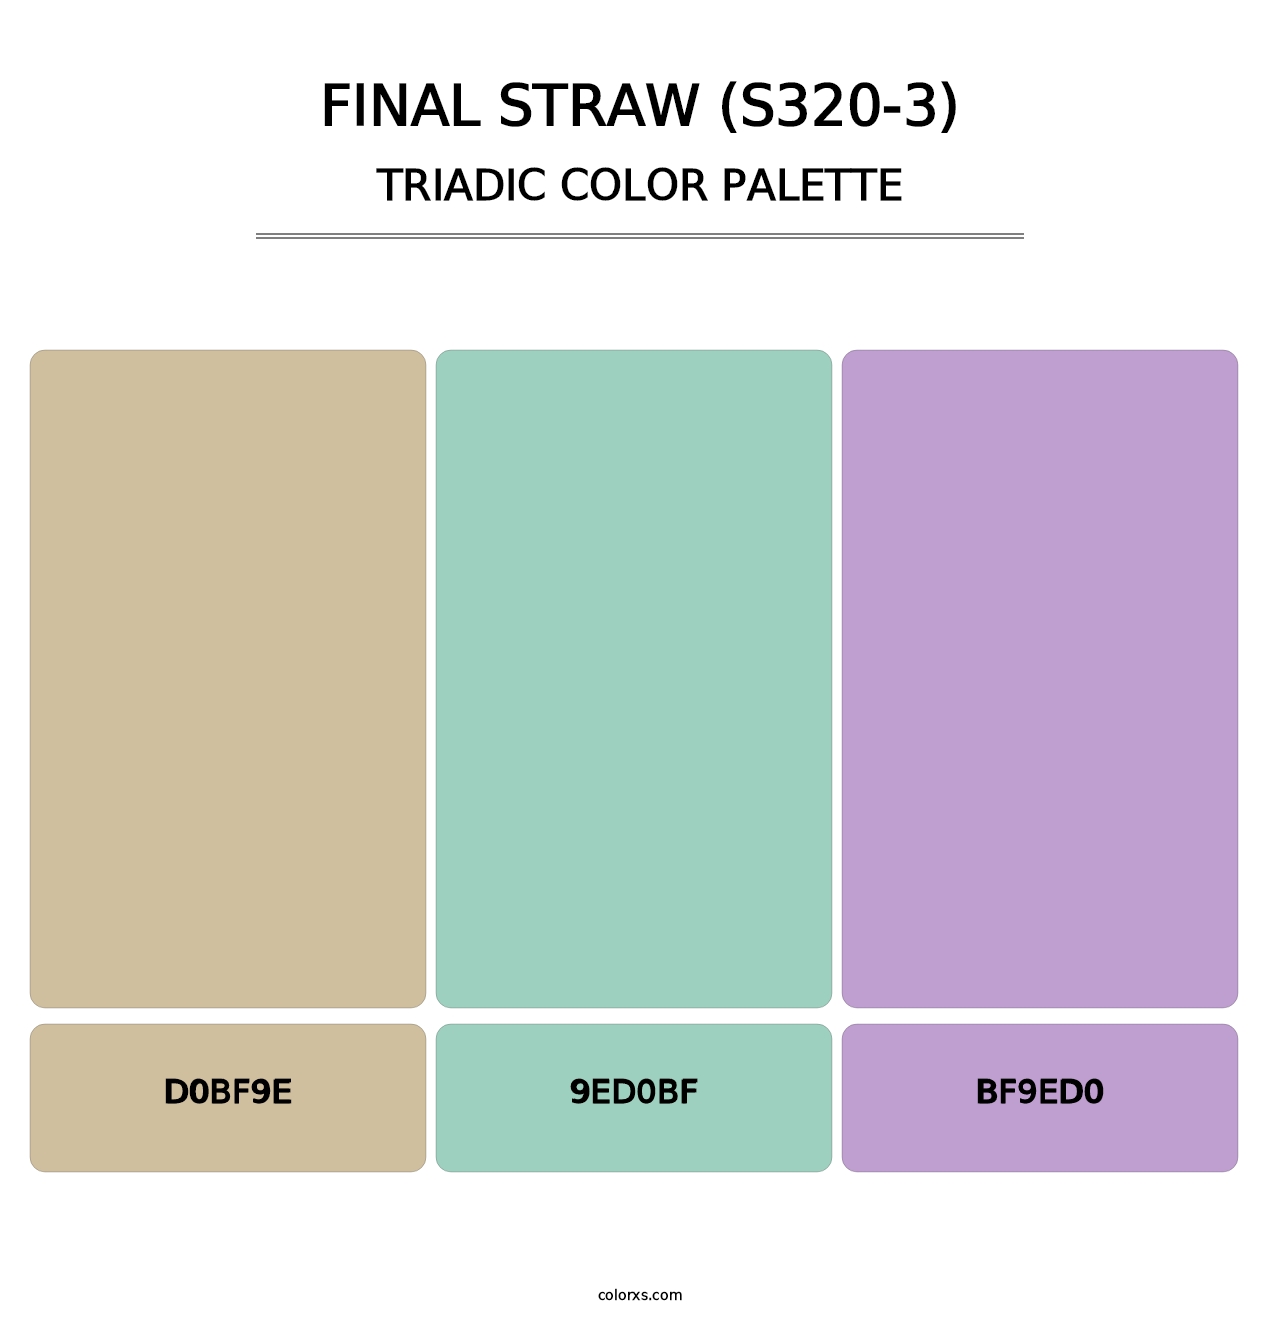 Final Straw (S320-3) - Triadic Color Palette